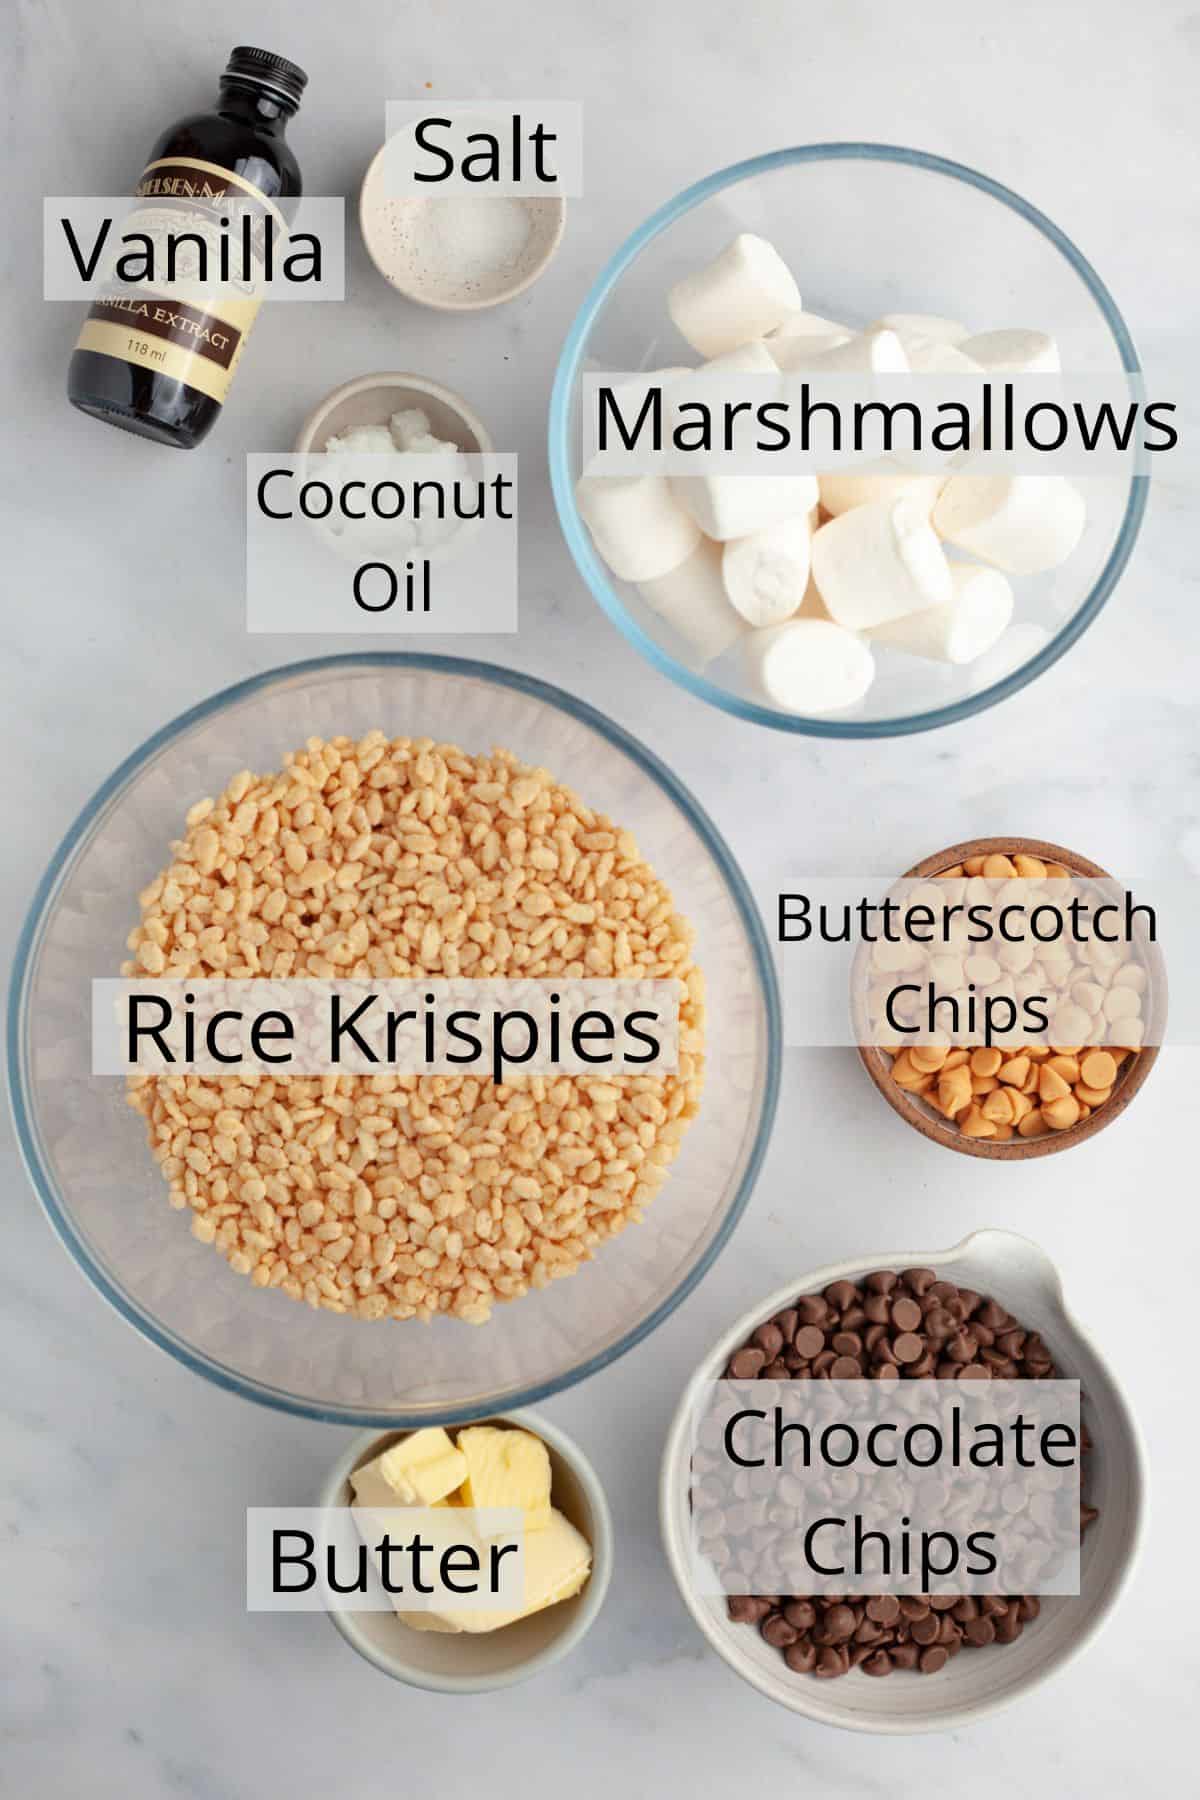 Ingredients needed to make chocolate covered rice krispie treats weighed out into small bowls.